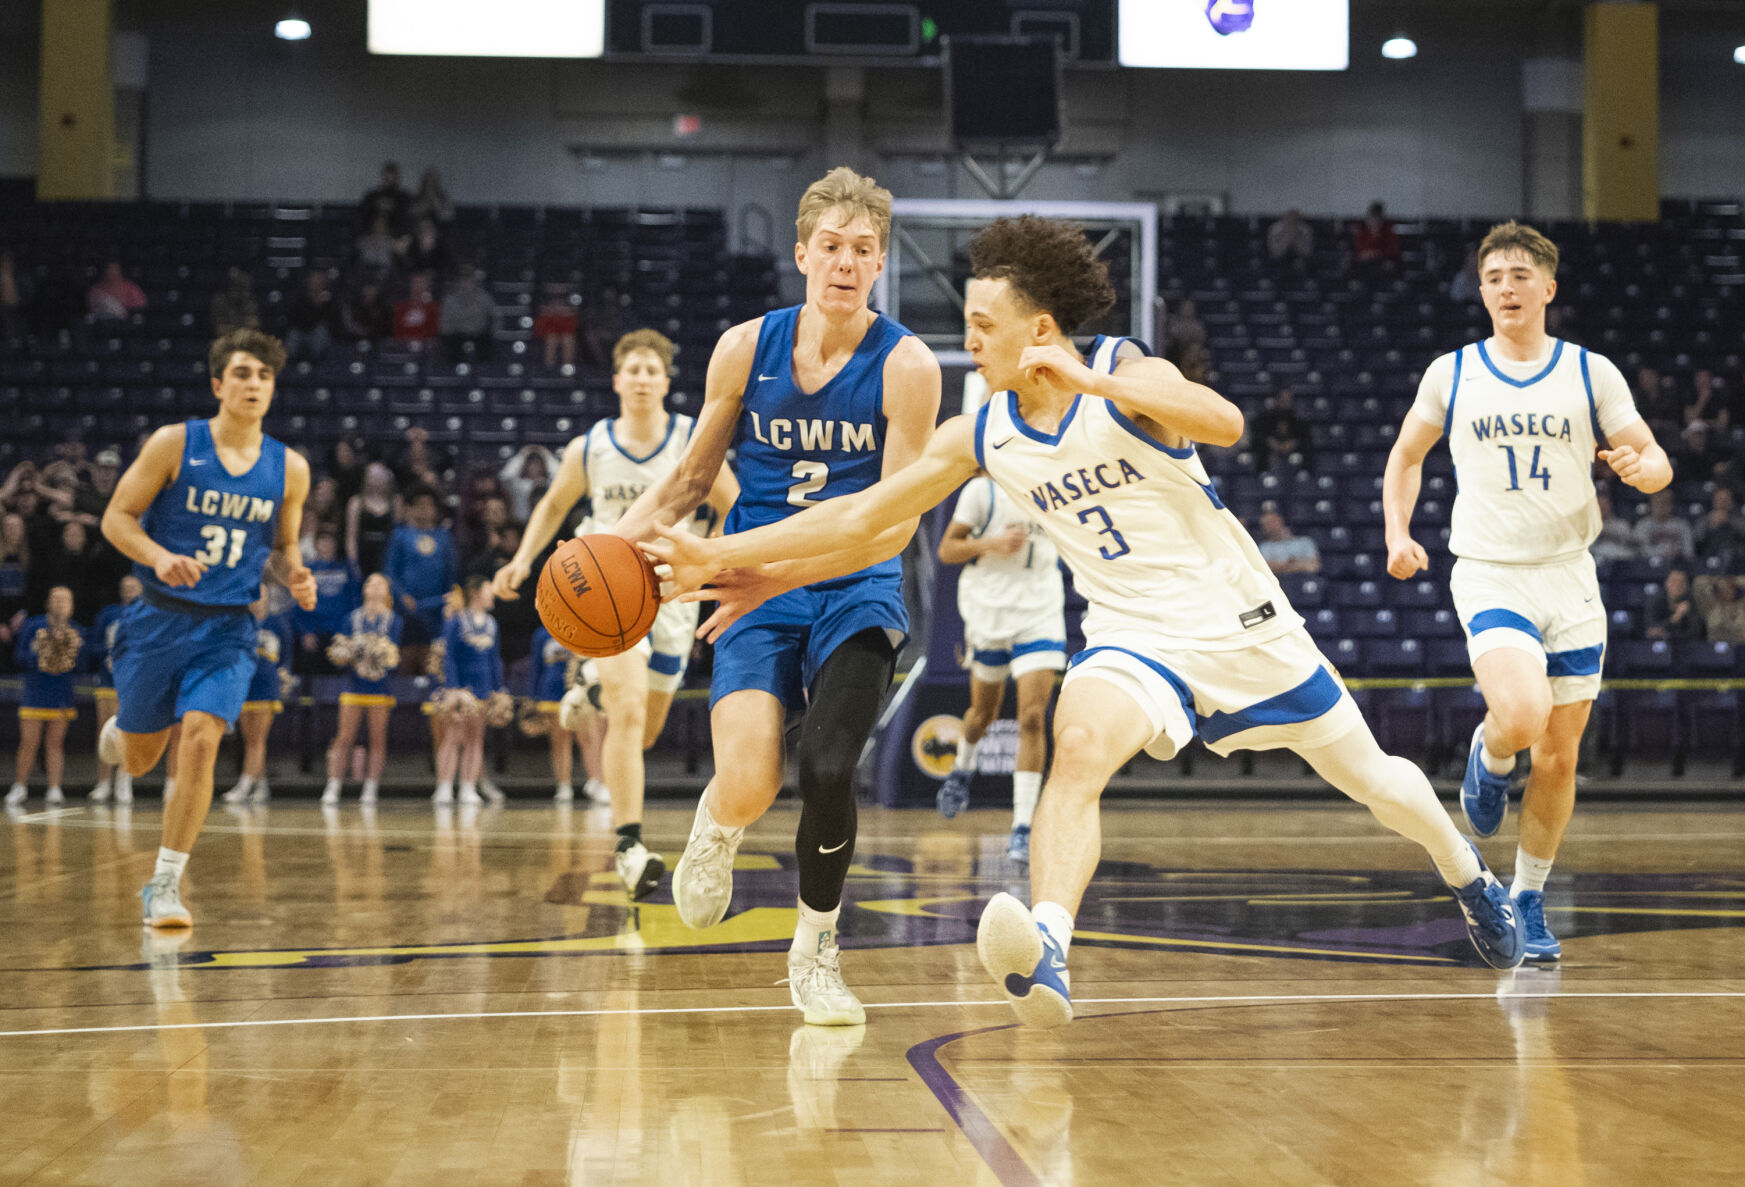 Waseca dominates LCWM with hot 3-point shooting to reach Section Championship